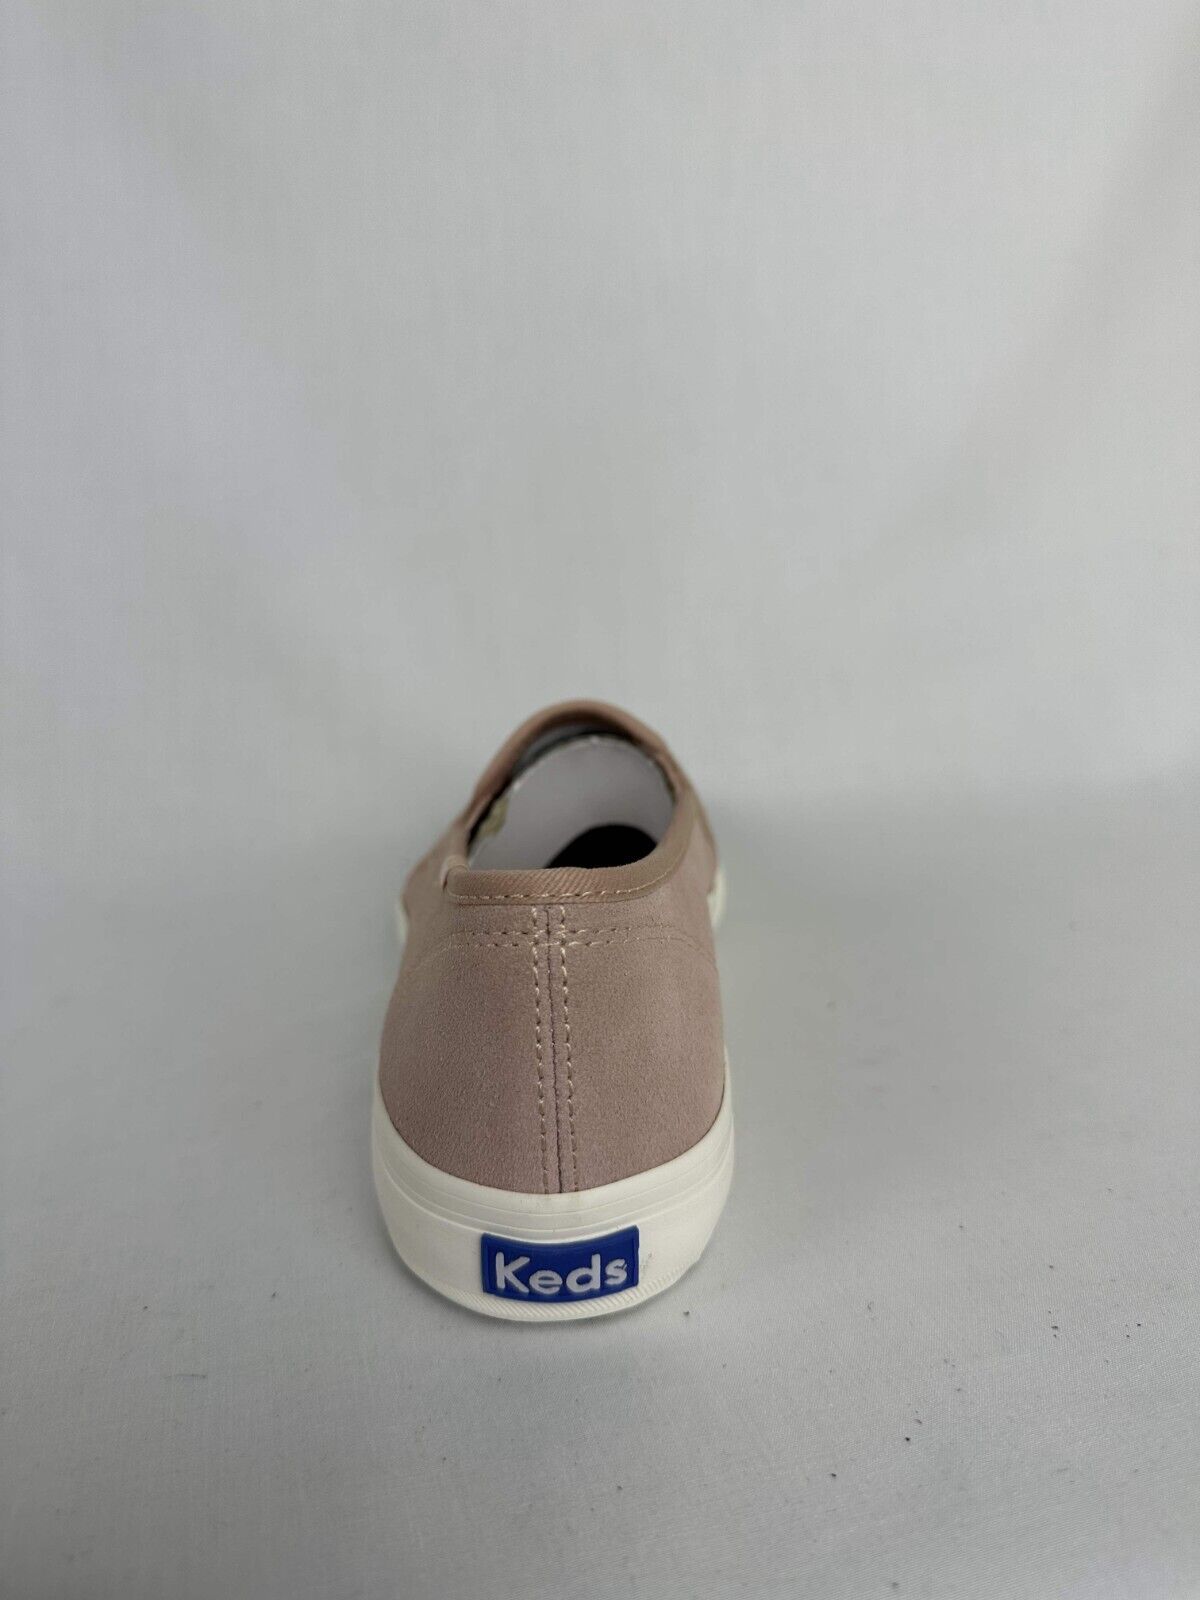 Keds Women 8.5 Double Decker Perf Suede Sneakers Pink Mauve Slip On Shoe WH61753